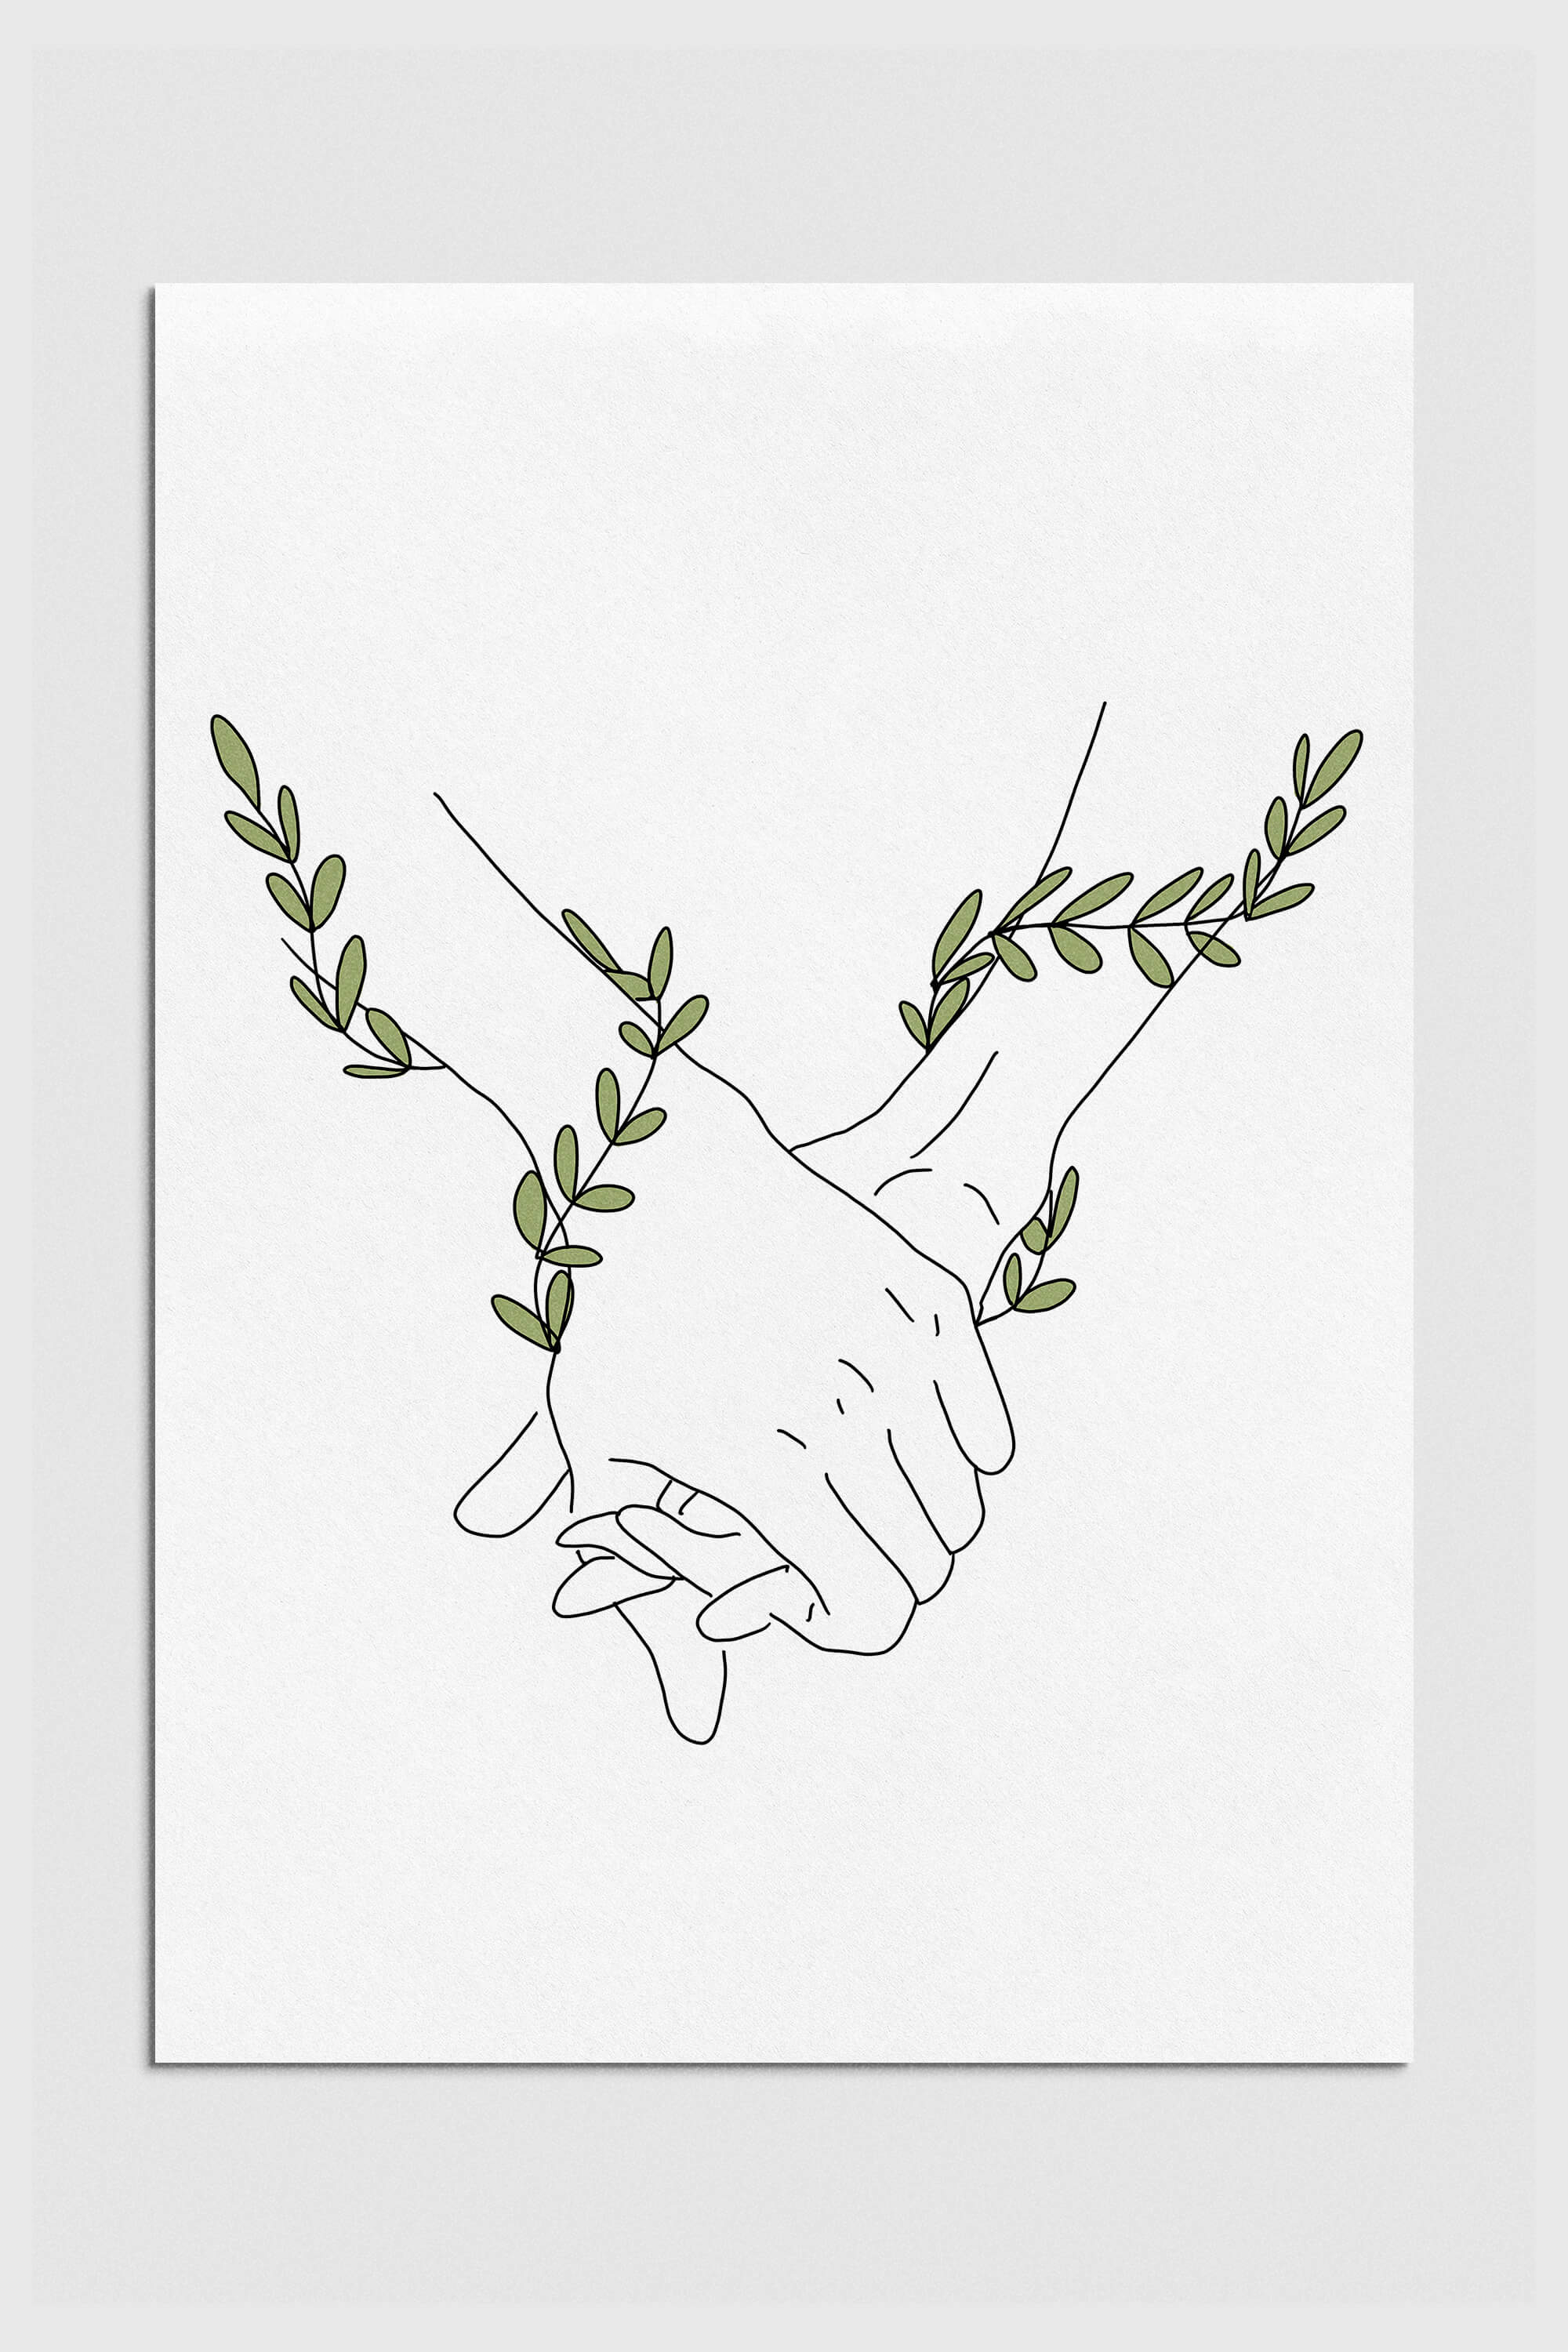 A romantic botanical line art print of a couple holding hands, symbolizing enduring love.